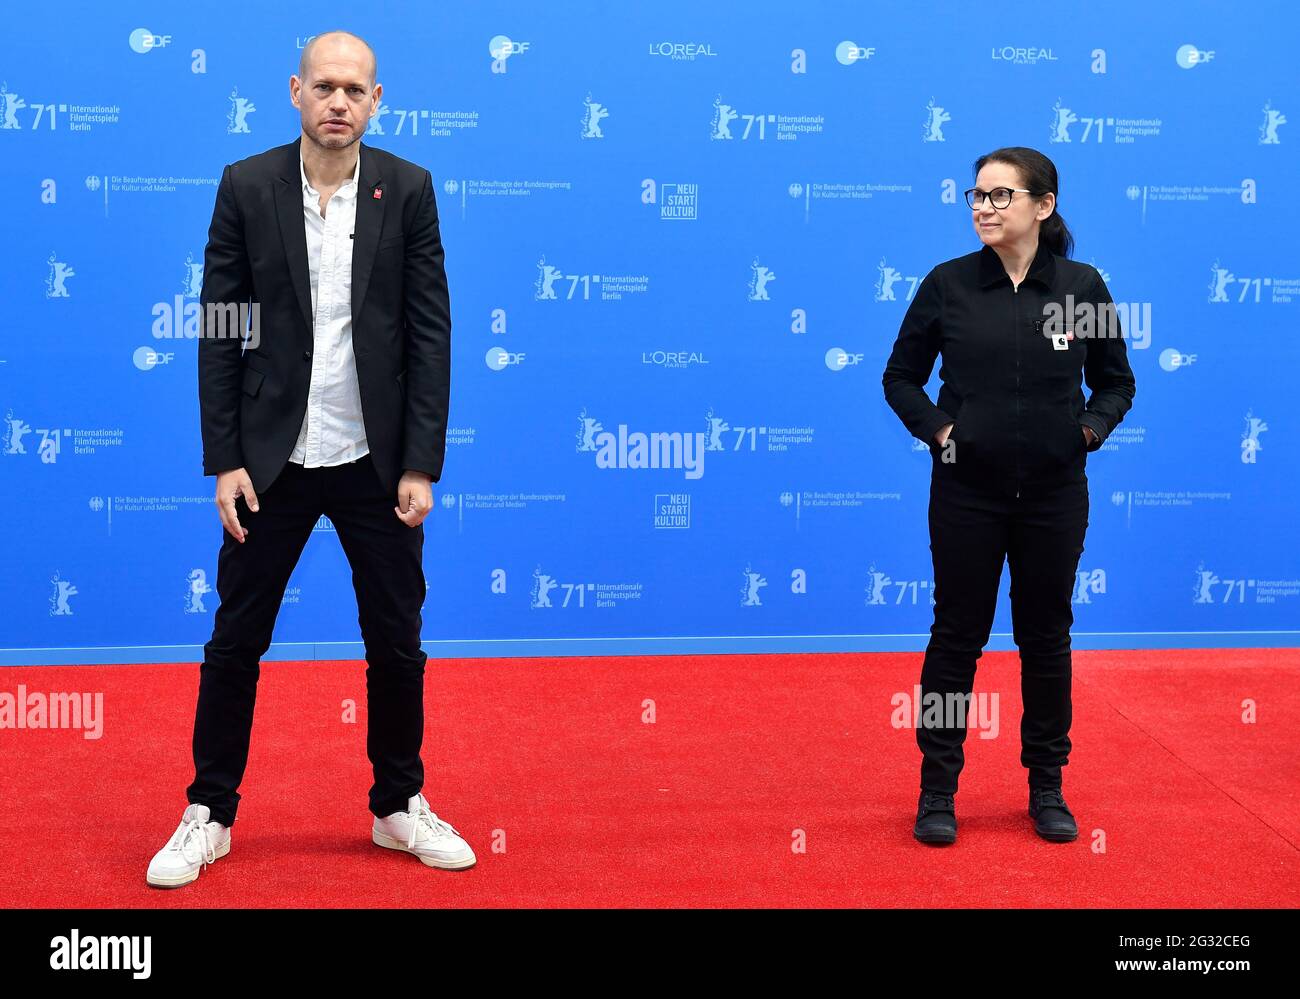 Berlin, Germany. 13th June, 2021. Members of the International Jury of the 71st Berlin International Film Festival, Israeli director Nadav Lapid and Hungarian director Ildiko Enyedi, show off before the awards ceremony at the Berlinale Summer Festival. Credit: Tobias Schwarz/AFP-Pool/dpa/Alamy Live News Stock Photo